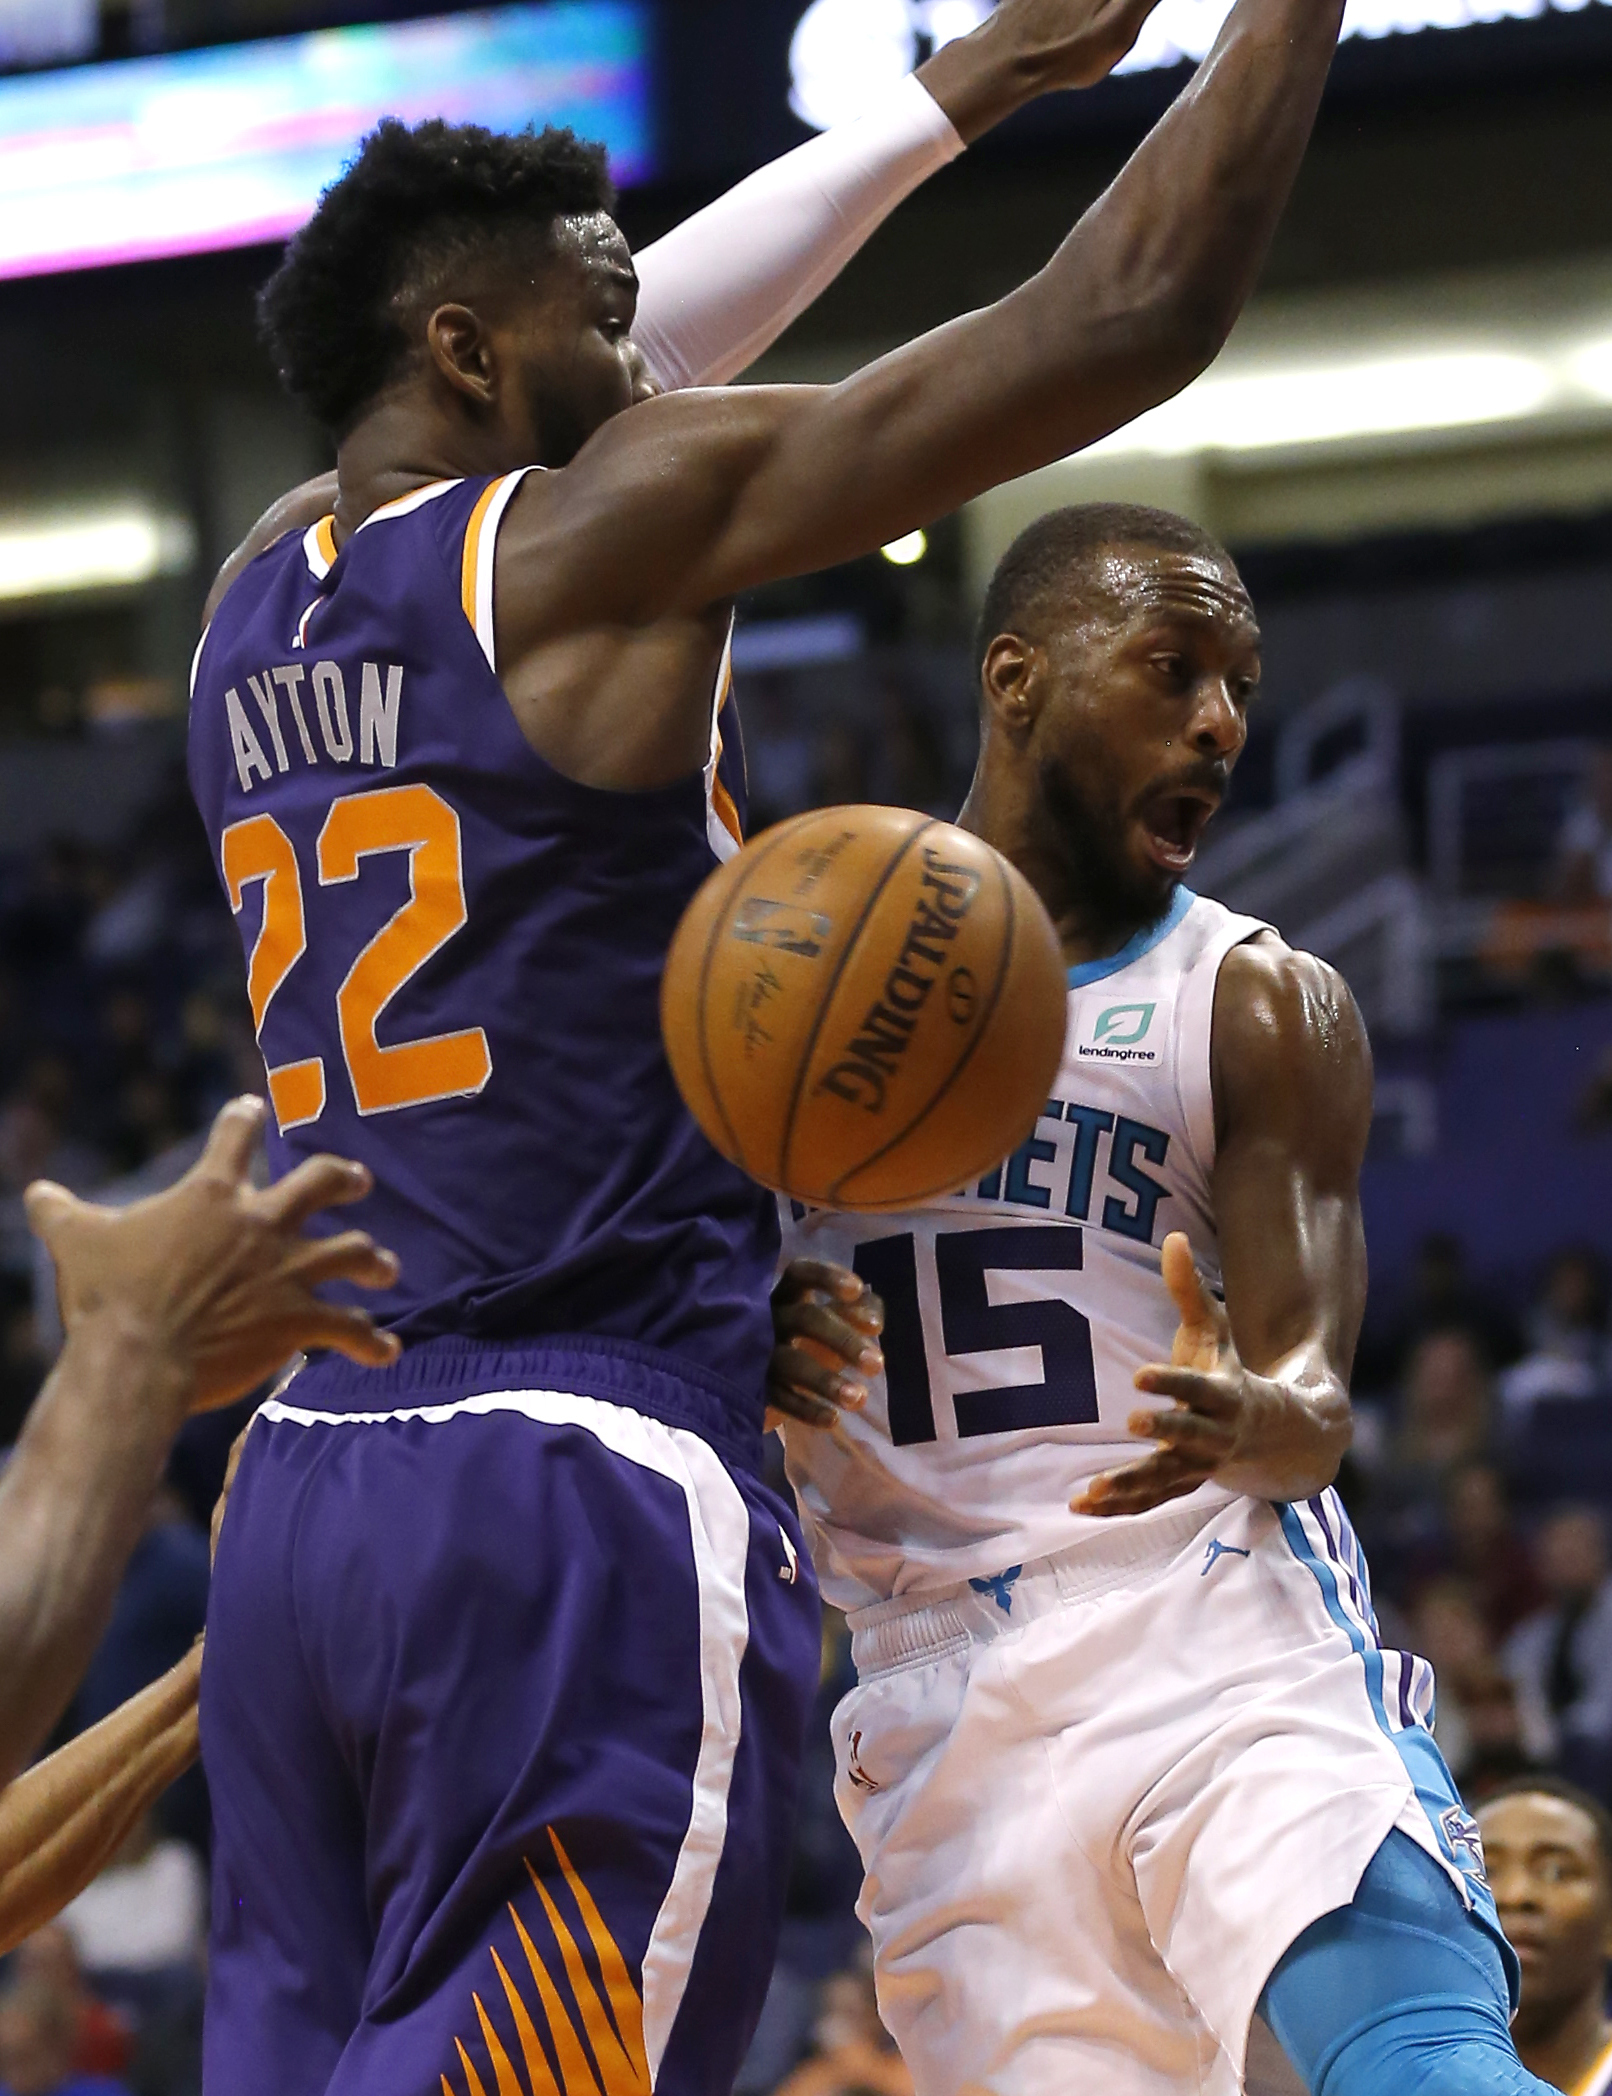 Walker’s big finish gives Hornets win over Suns